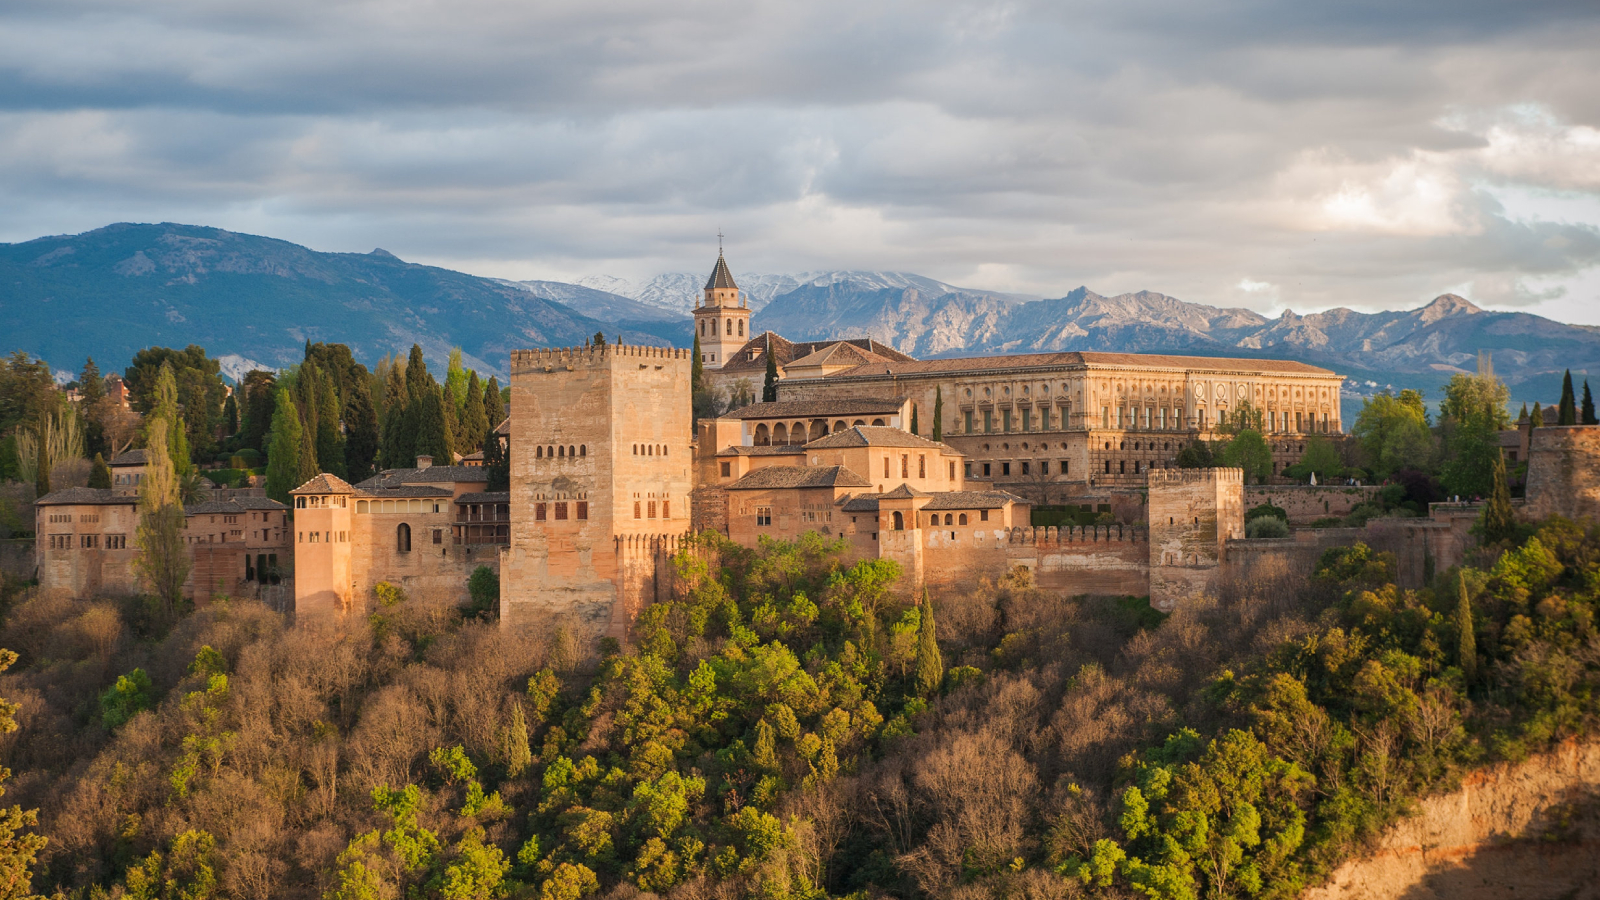 The Alhambra Palace: Skip-The-Line e-ticket with Audio Tour